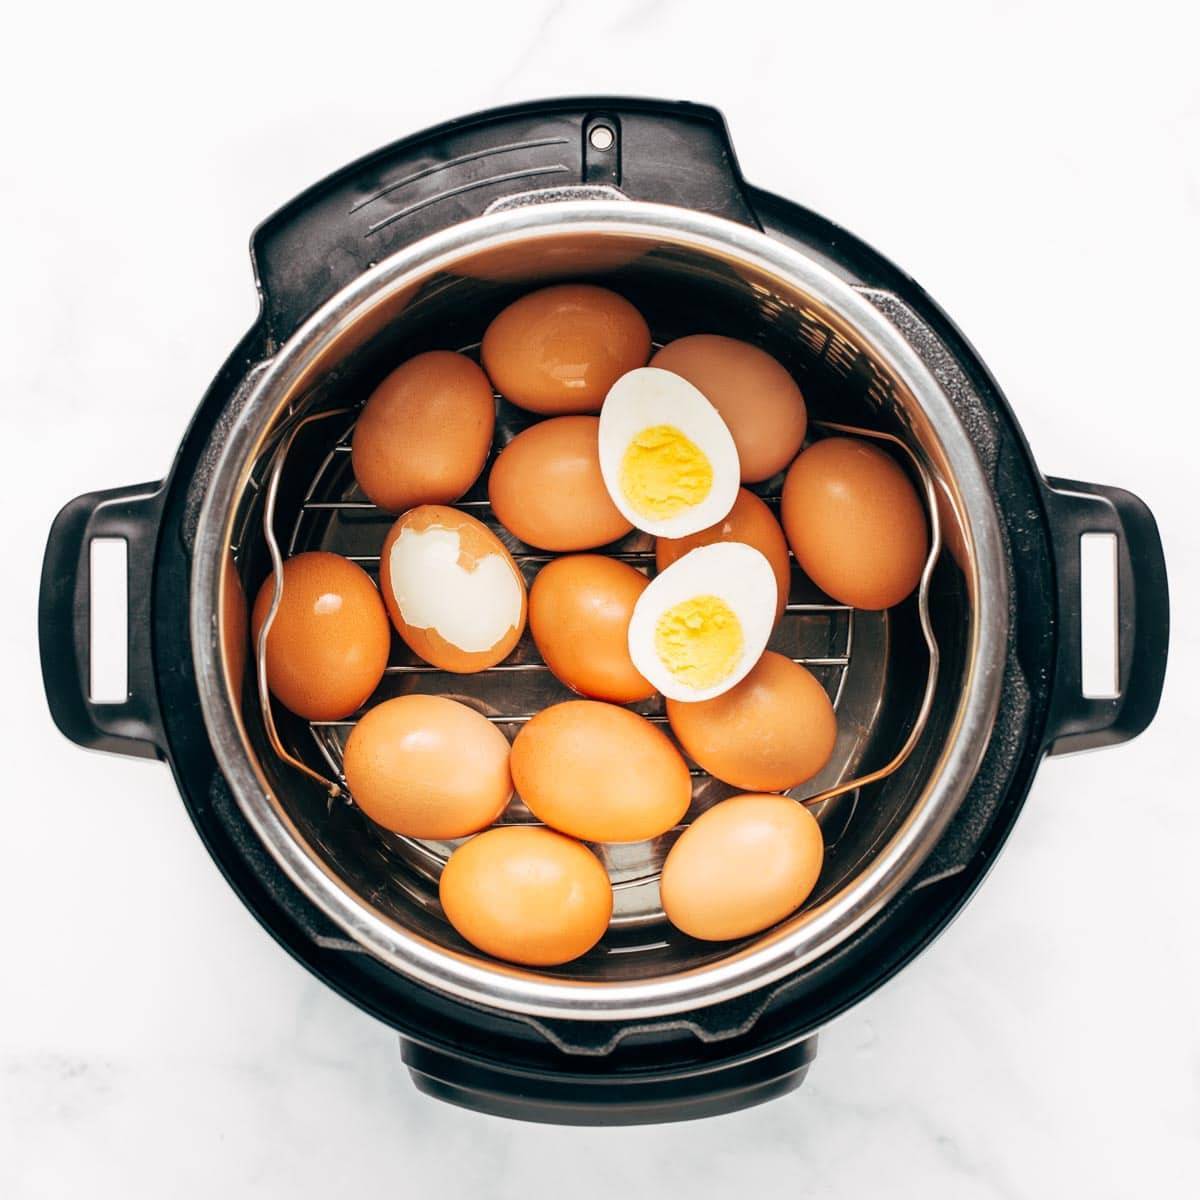 Eggs in the Instant Pot. One egg is cut open and it's hard-boiled. 